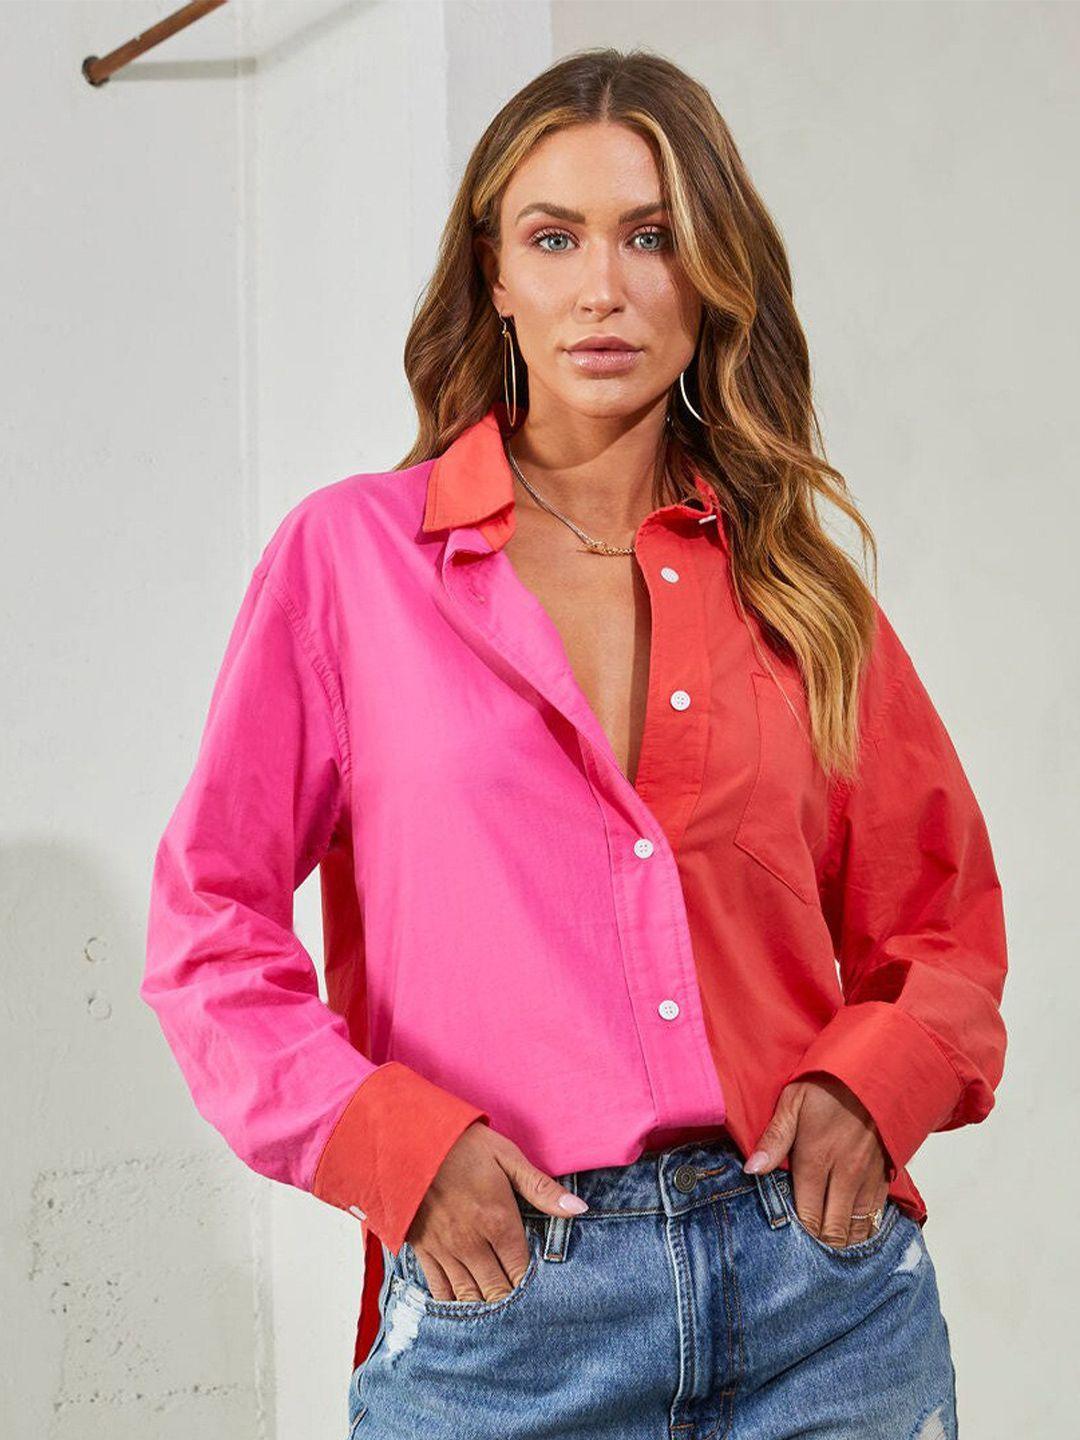 stylecast pink & red colourblocked spread collar casual shirt